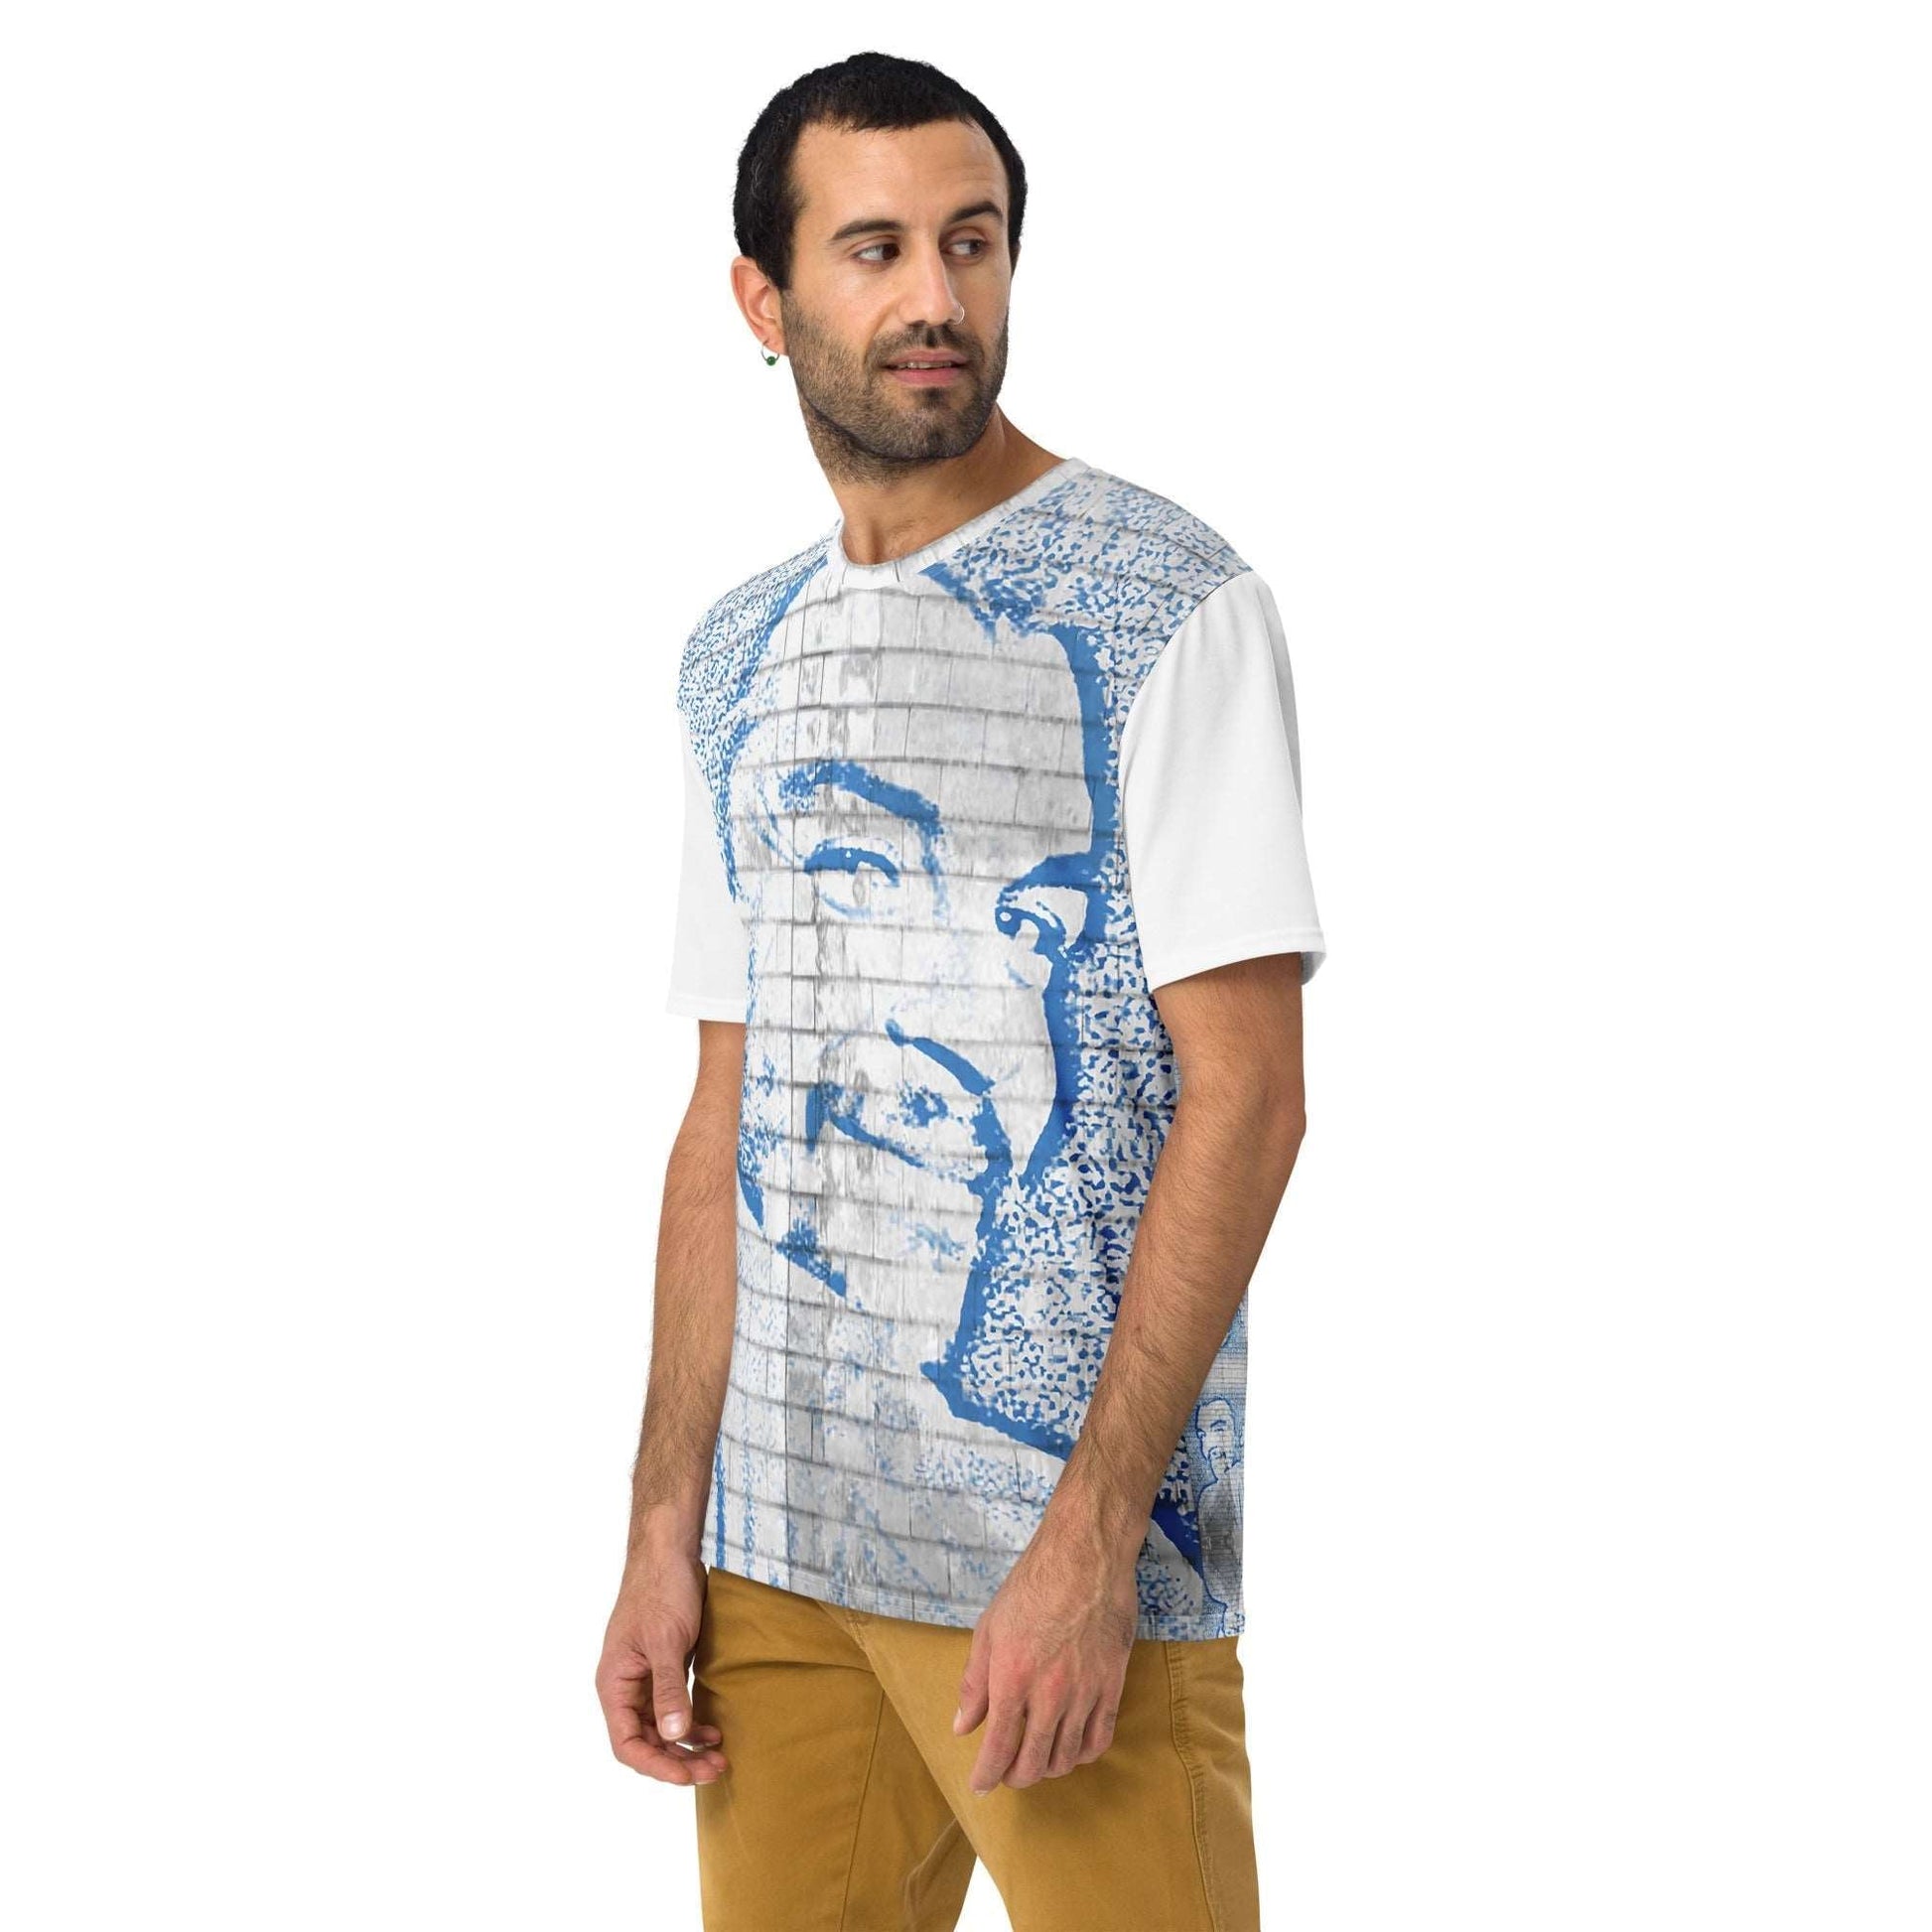 Che Guevara All-Over Print Men's Crew Neck T-Shirt - Souled Out World